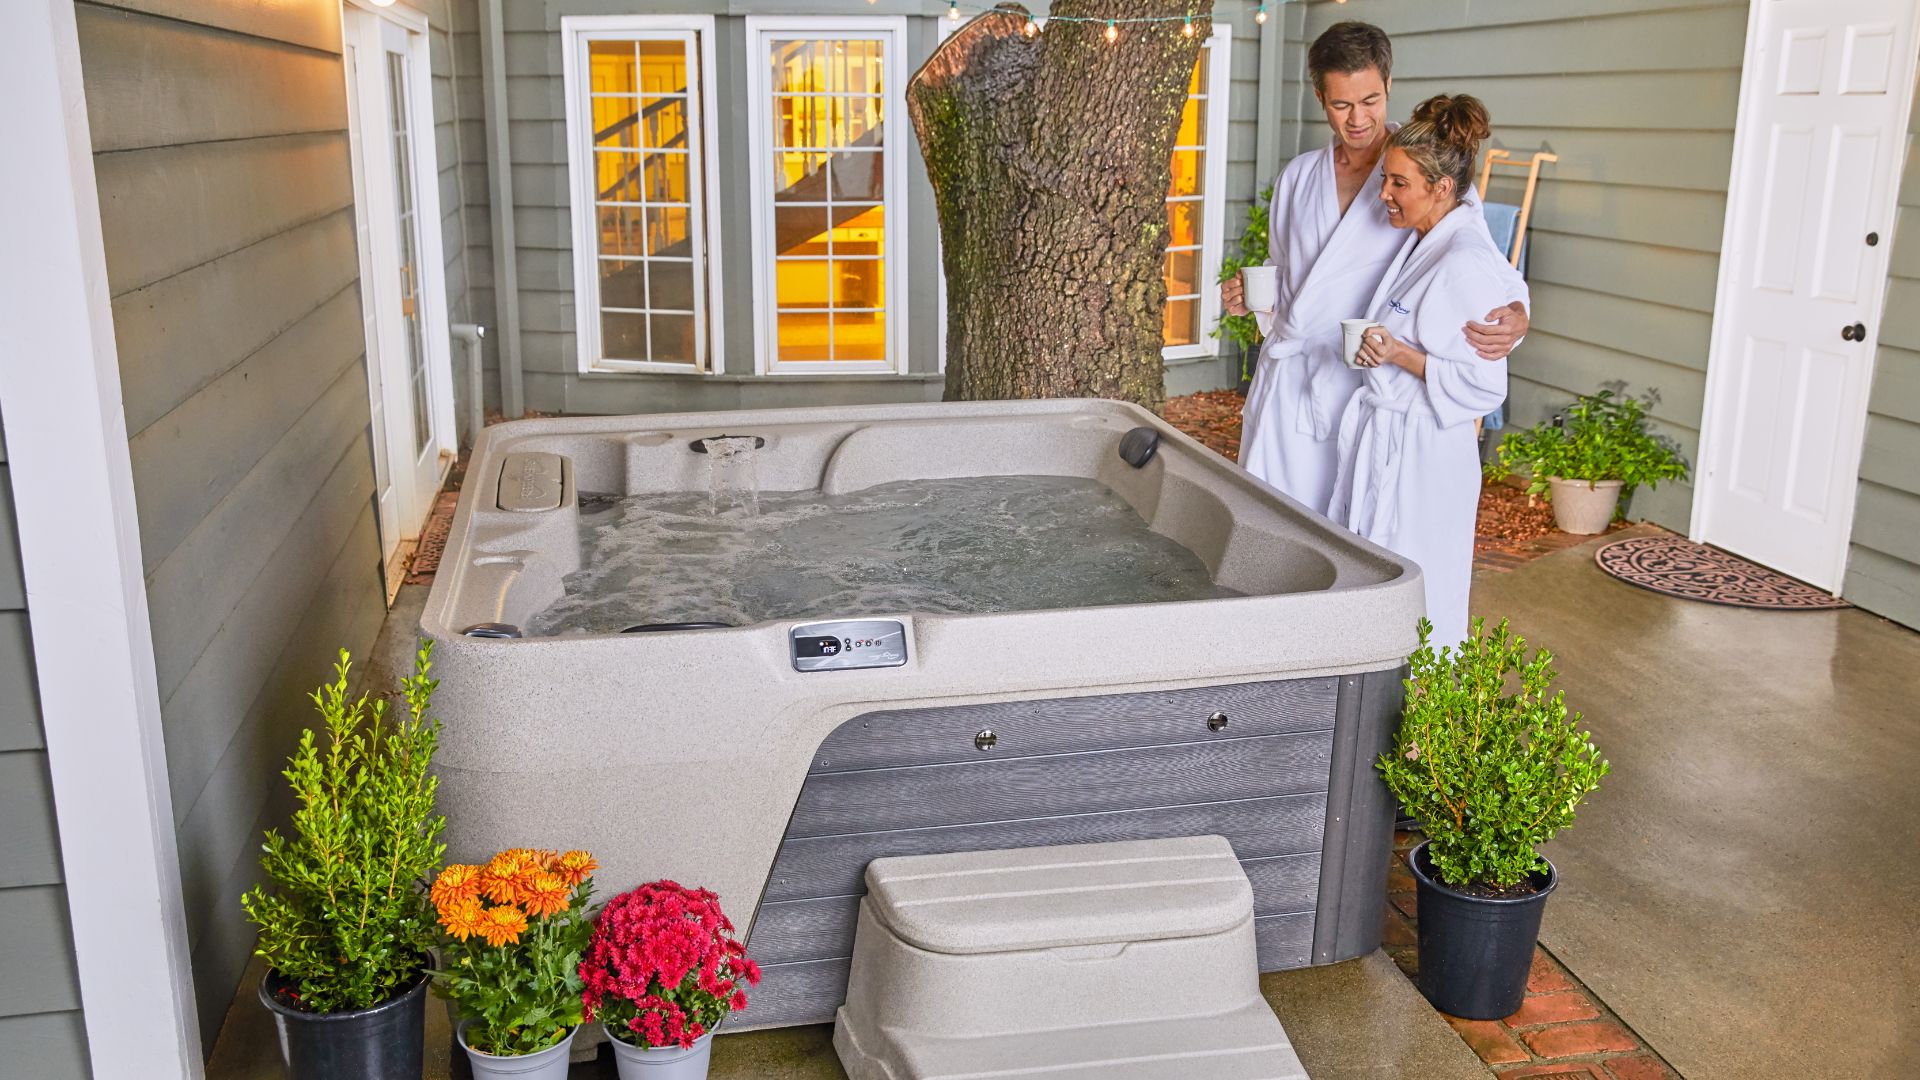 5 Steps to Get Your Hot Tub Ready for the Fall Season